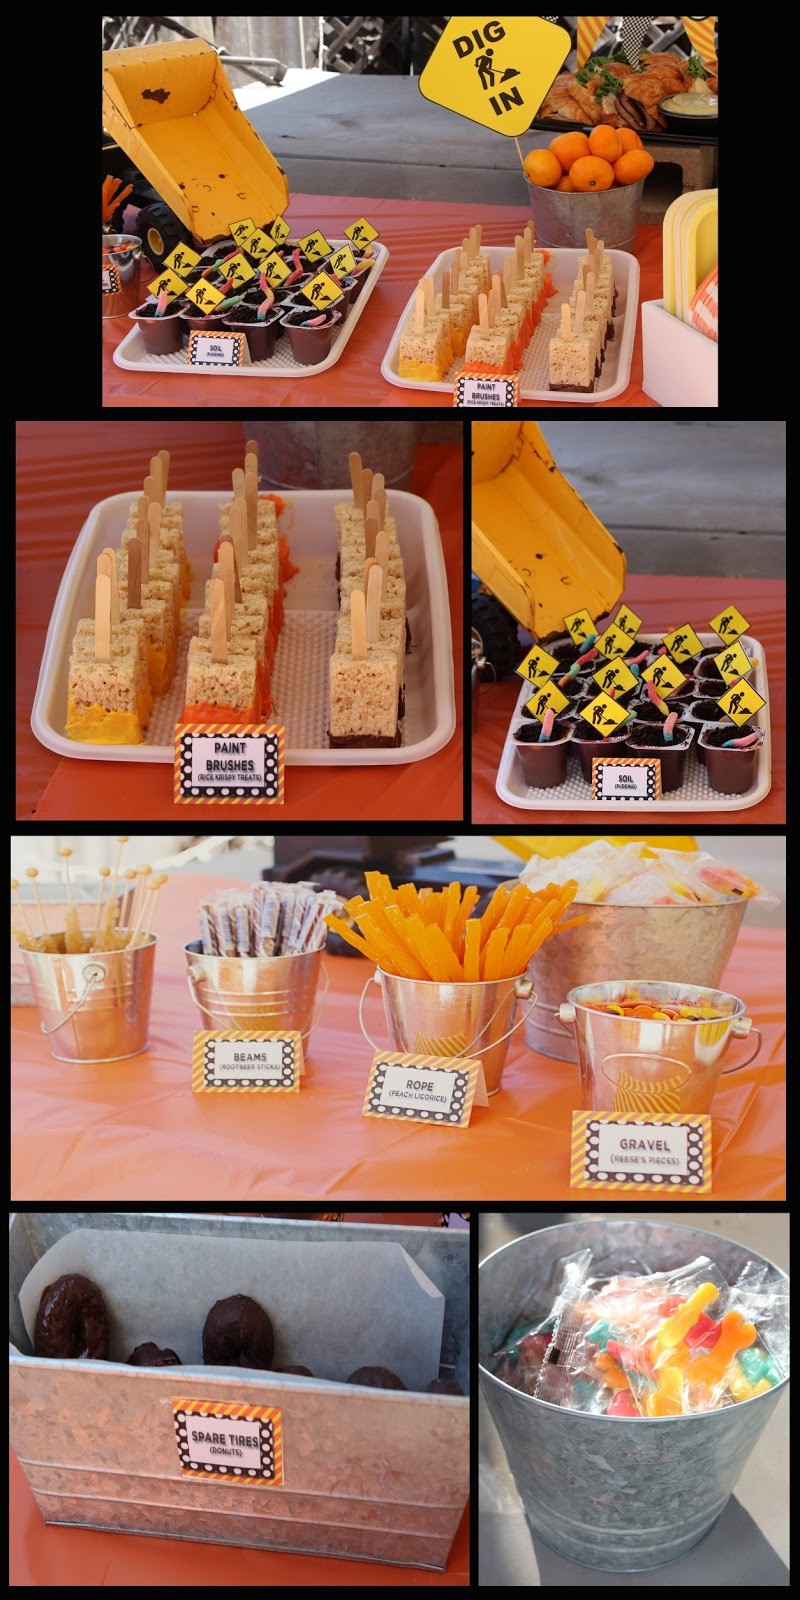 Construction Themed Birthday Party Food Ideas
 What a Ride Jadon s Construction Themed 3rd Birthday Party